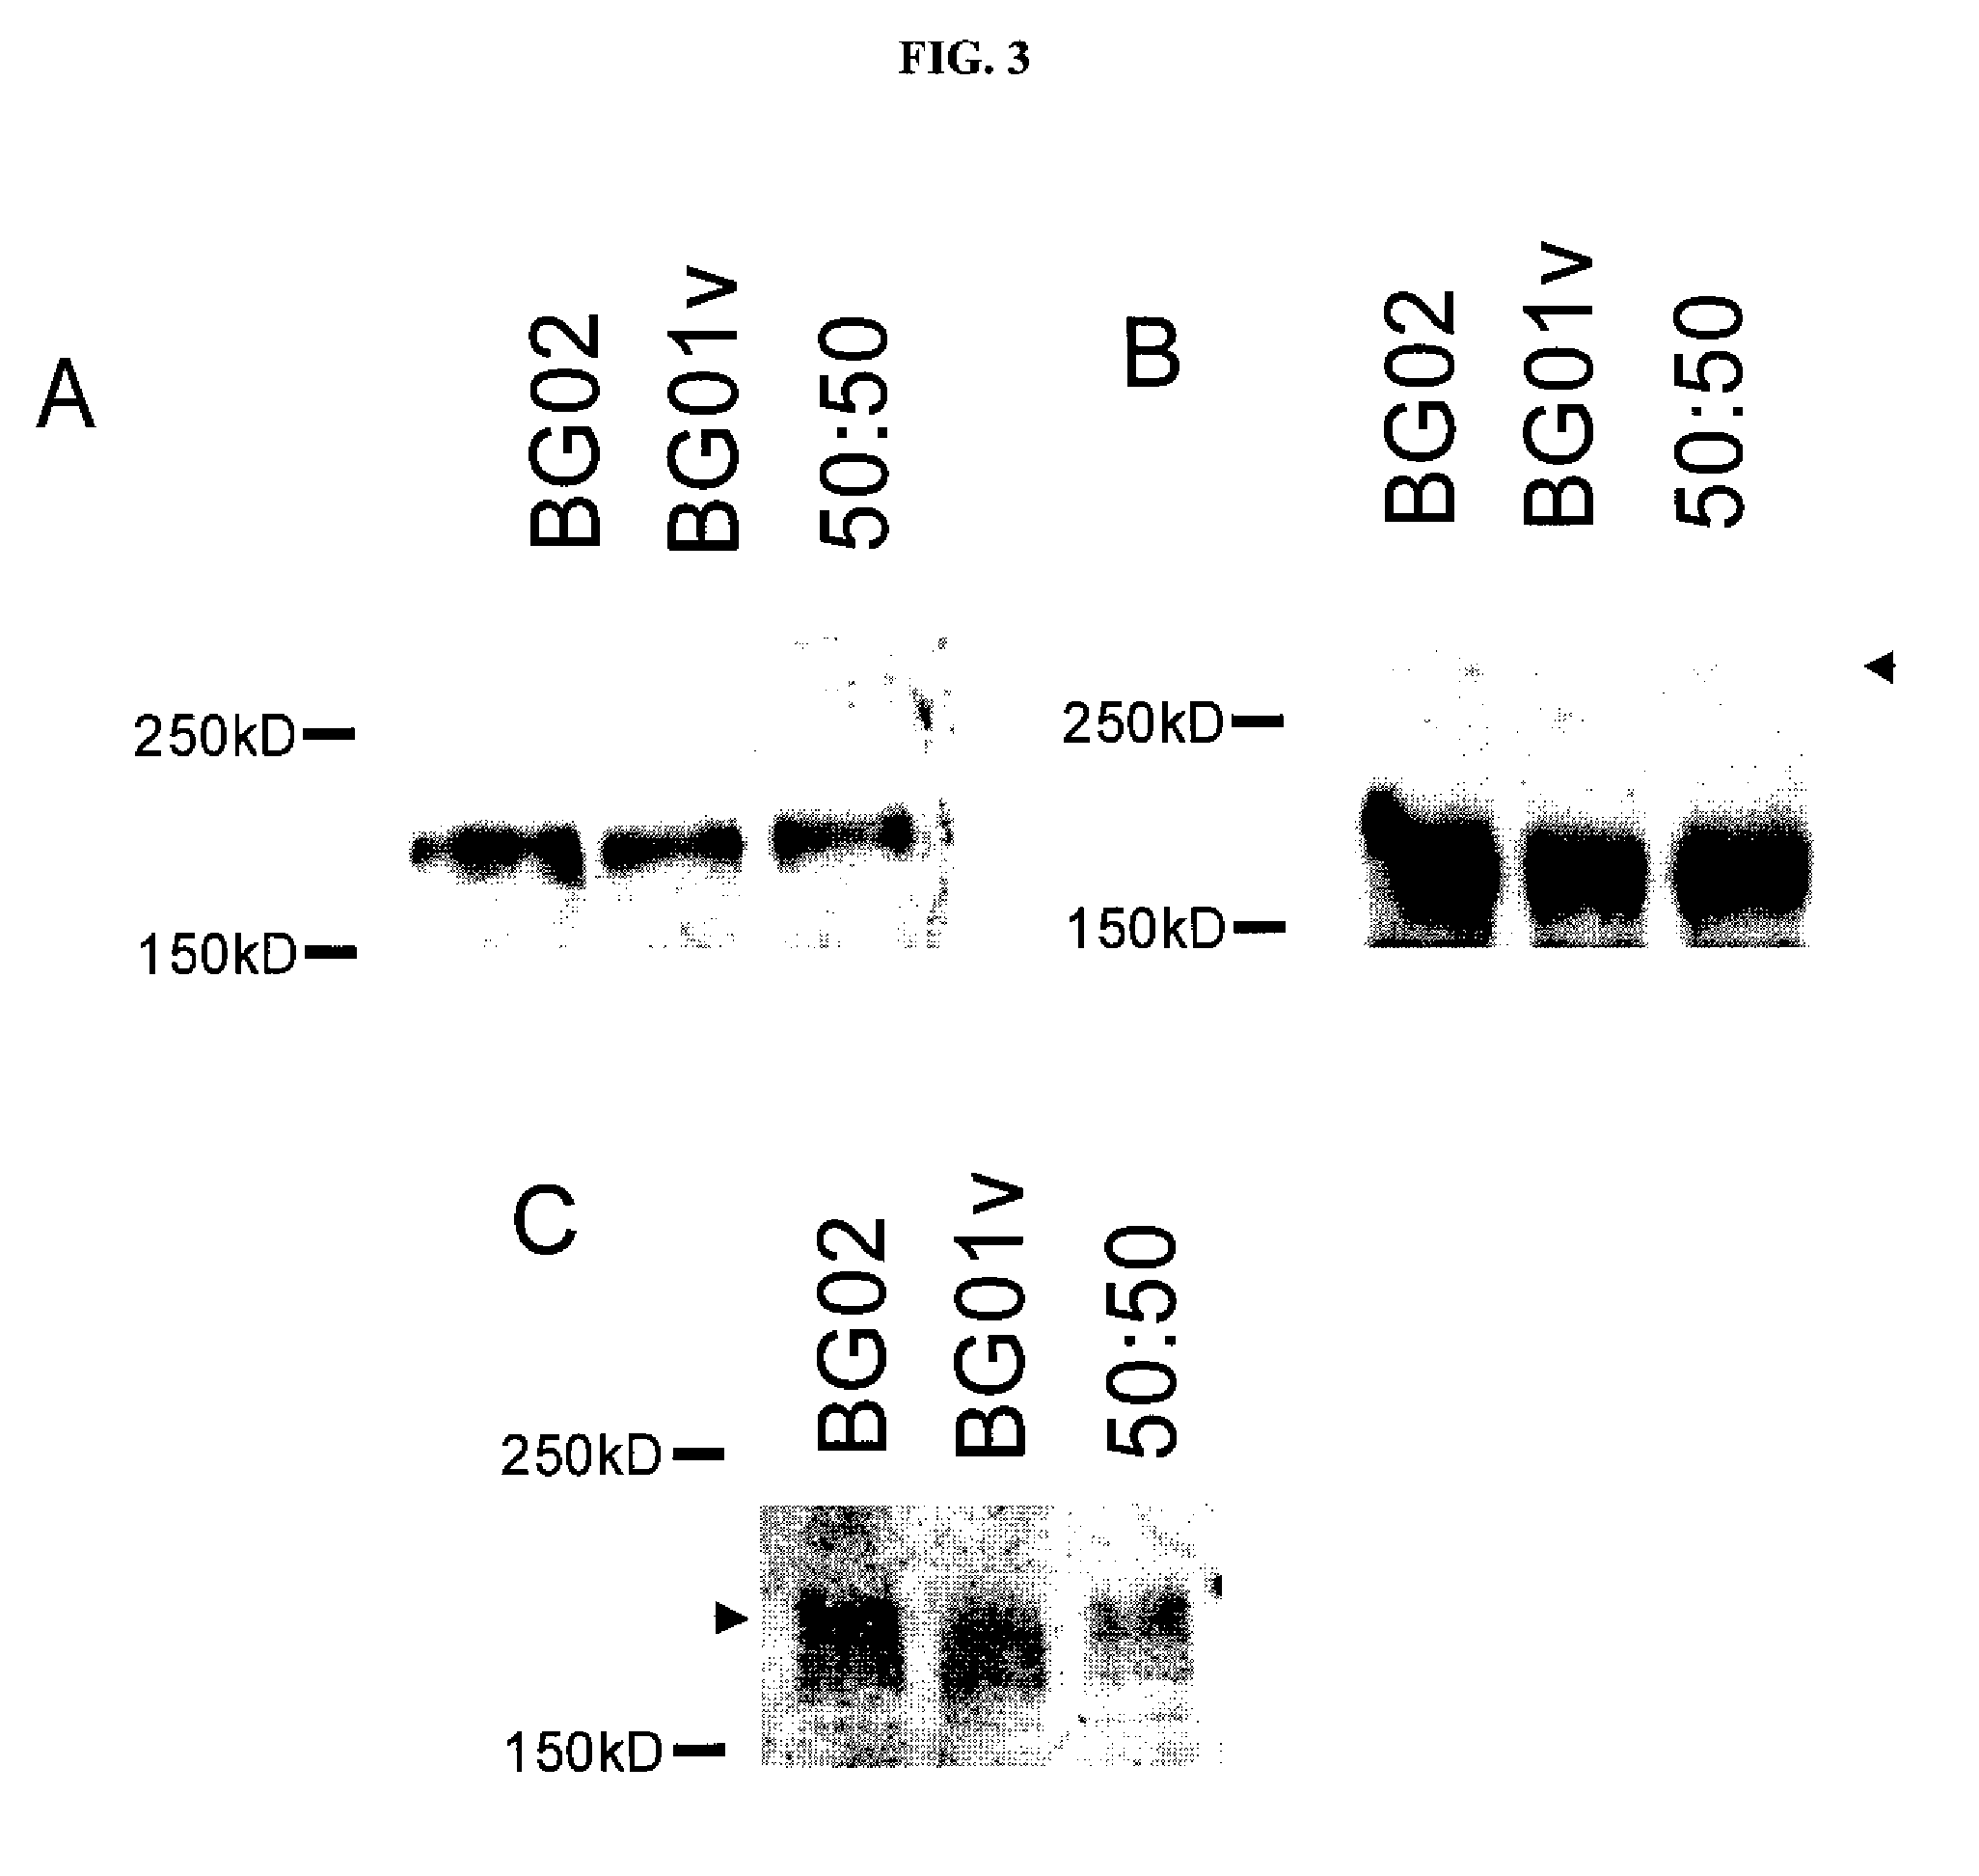 Human cancer stem cell culture compositions comprising Erbb2 variants and methods of use thereof